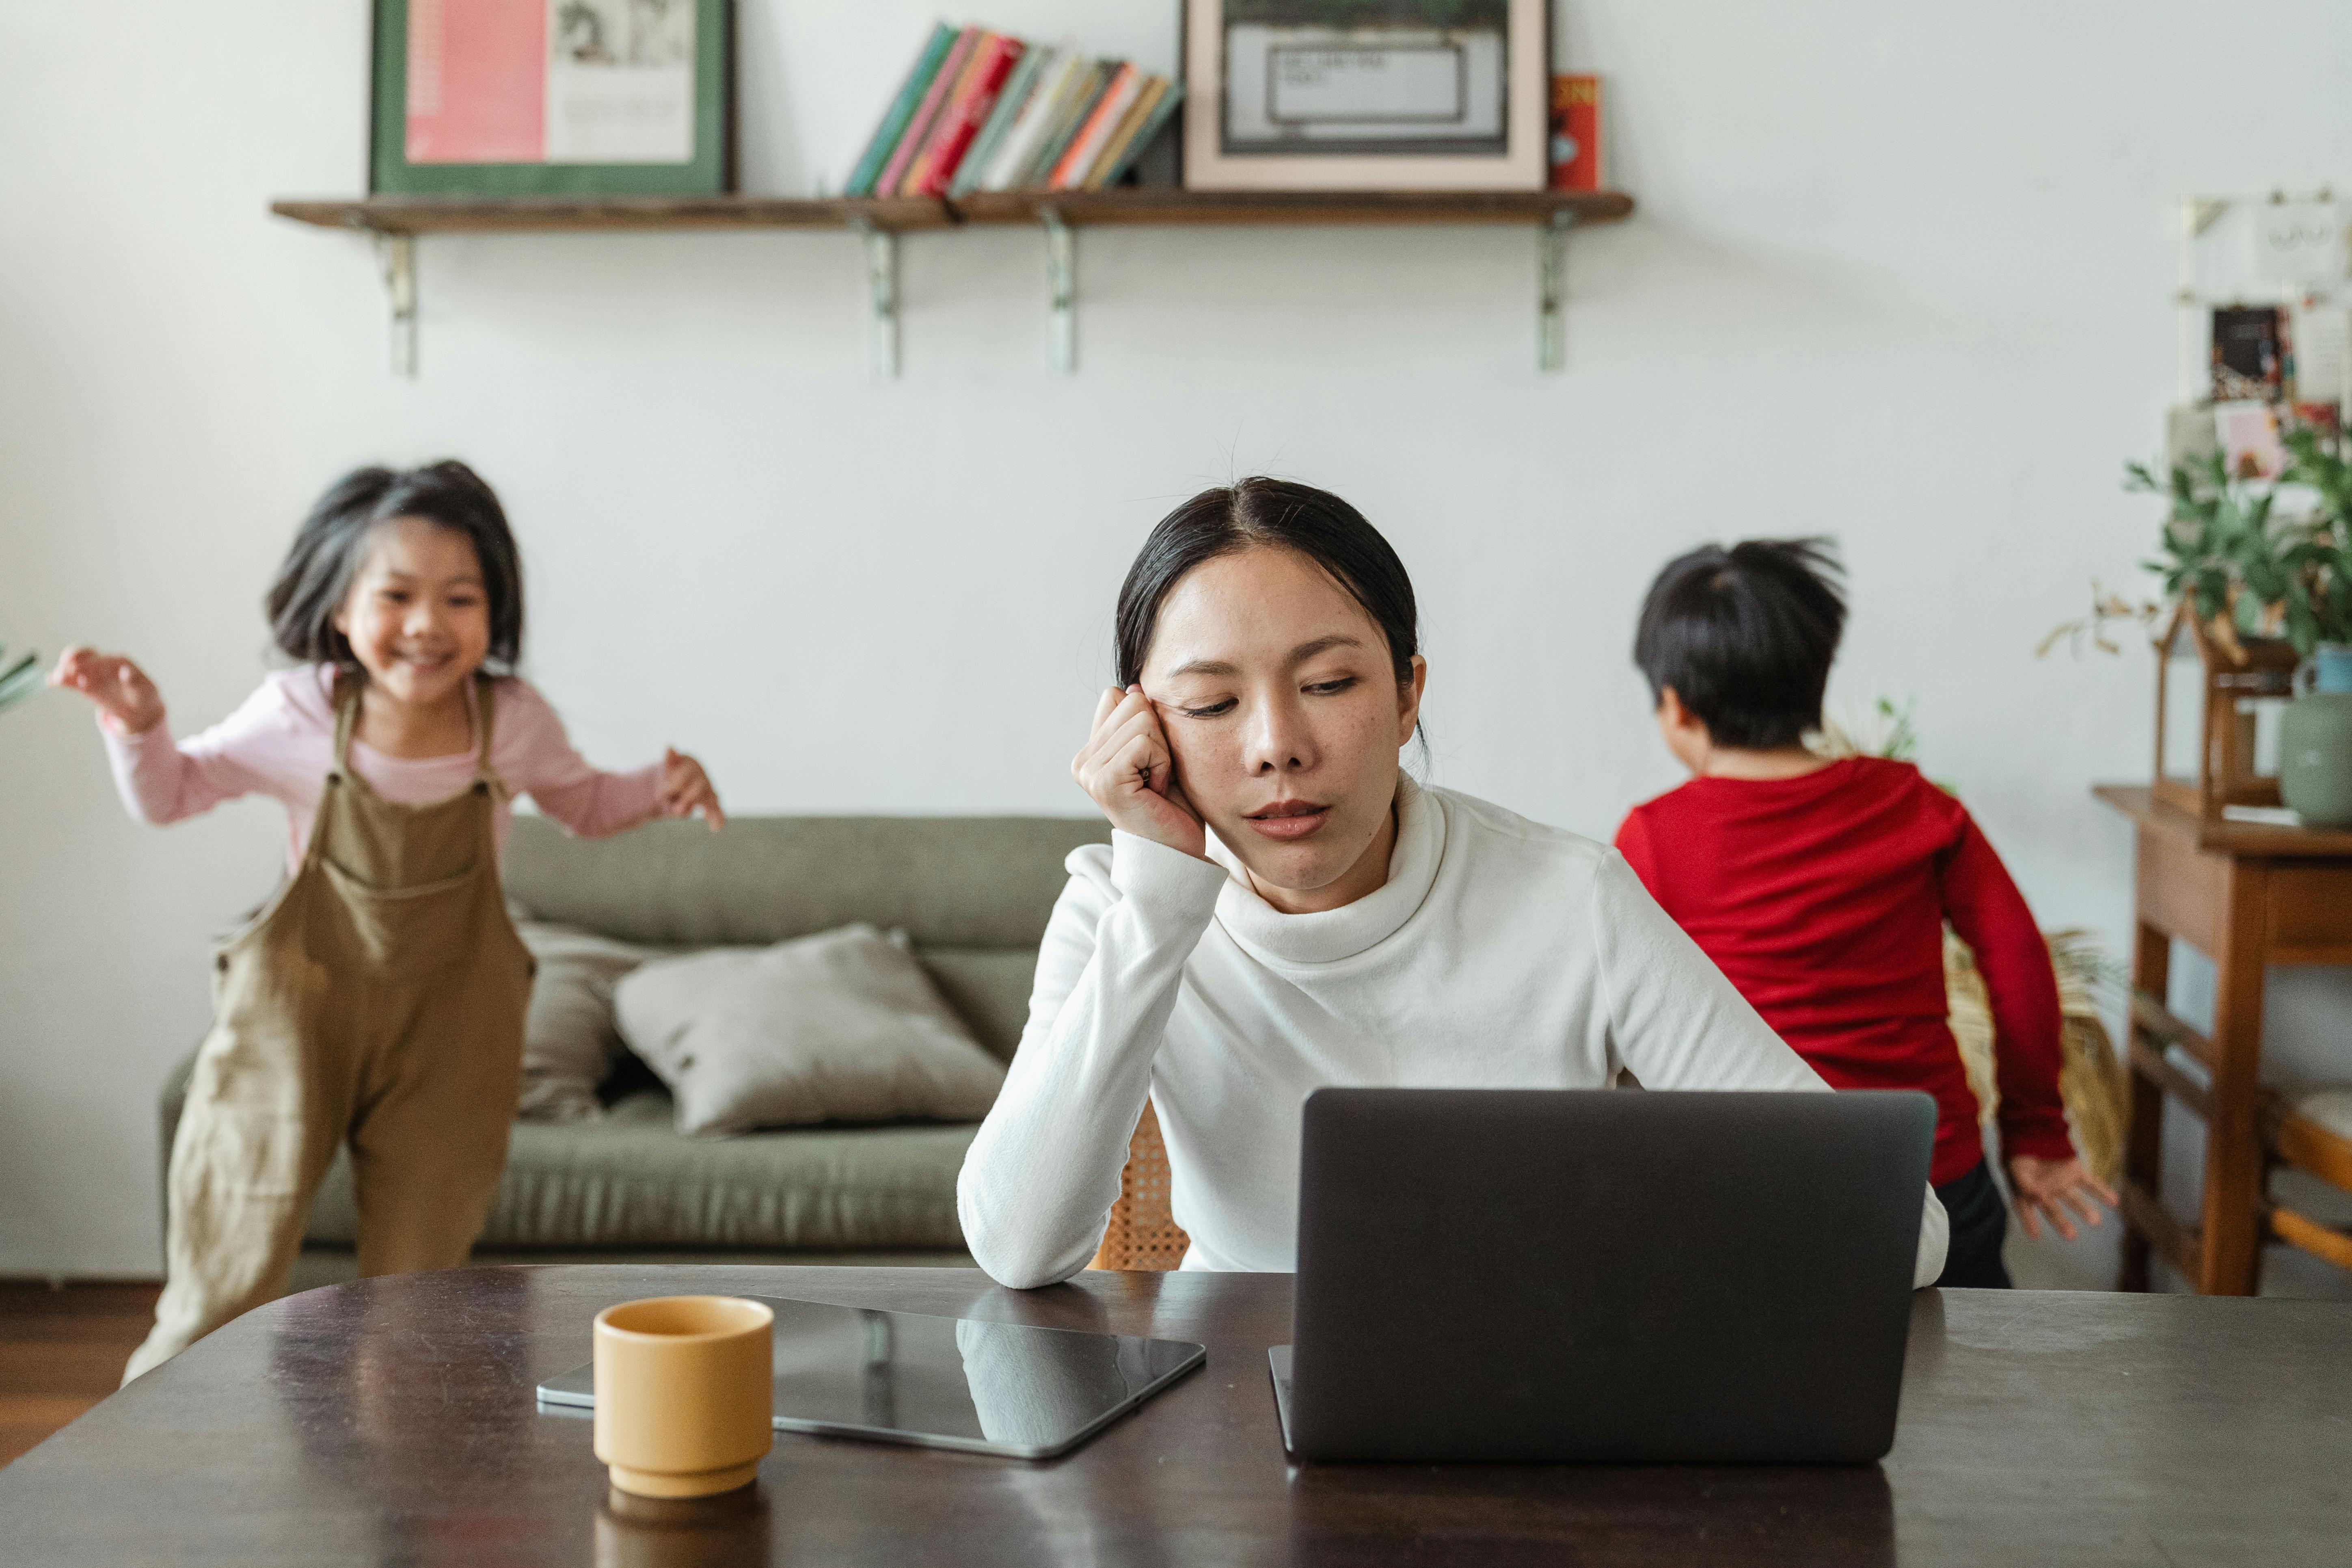 An exhausted woman sitting by a computer as her children play in the background | Source: Pexels